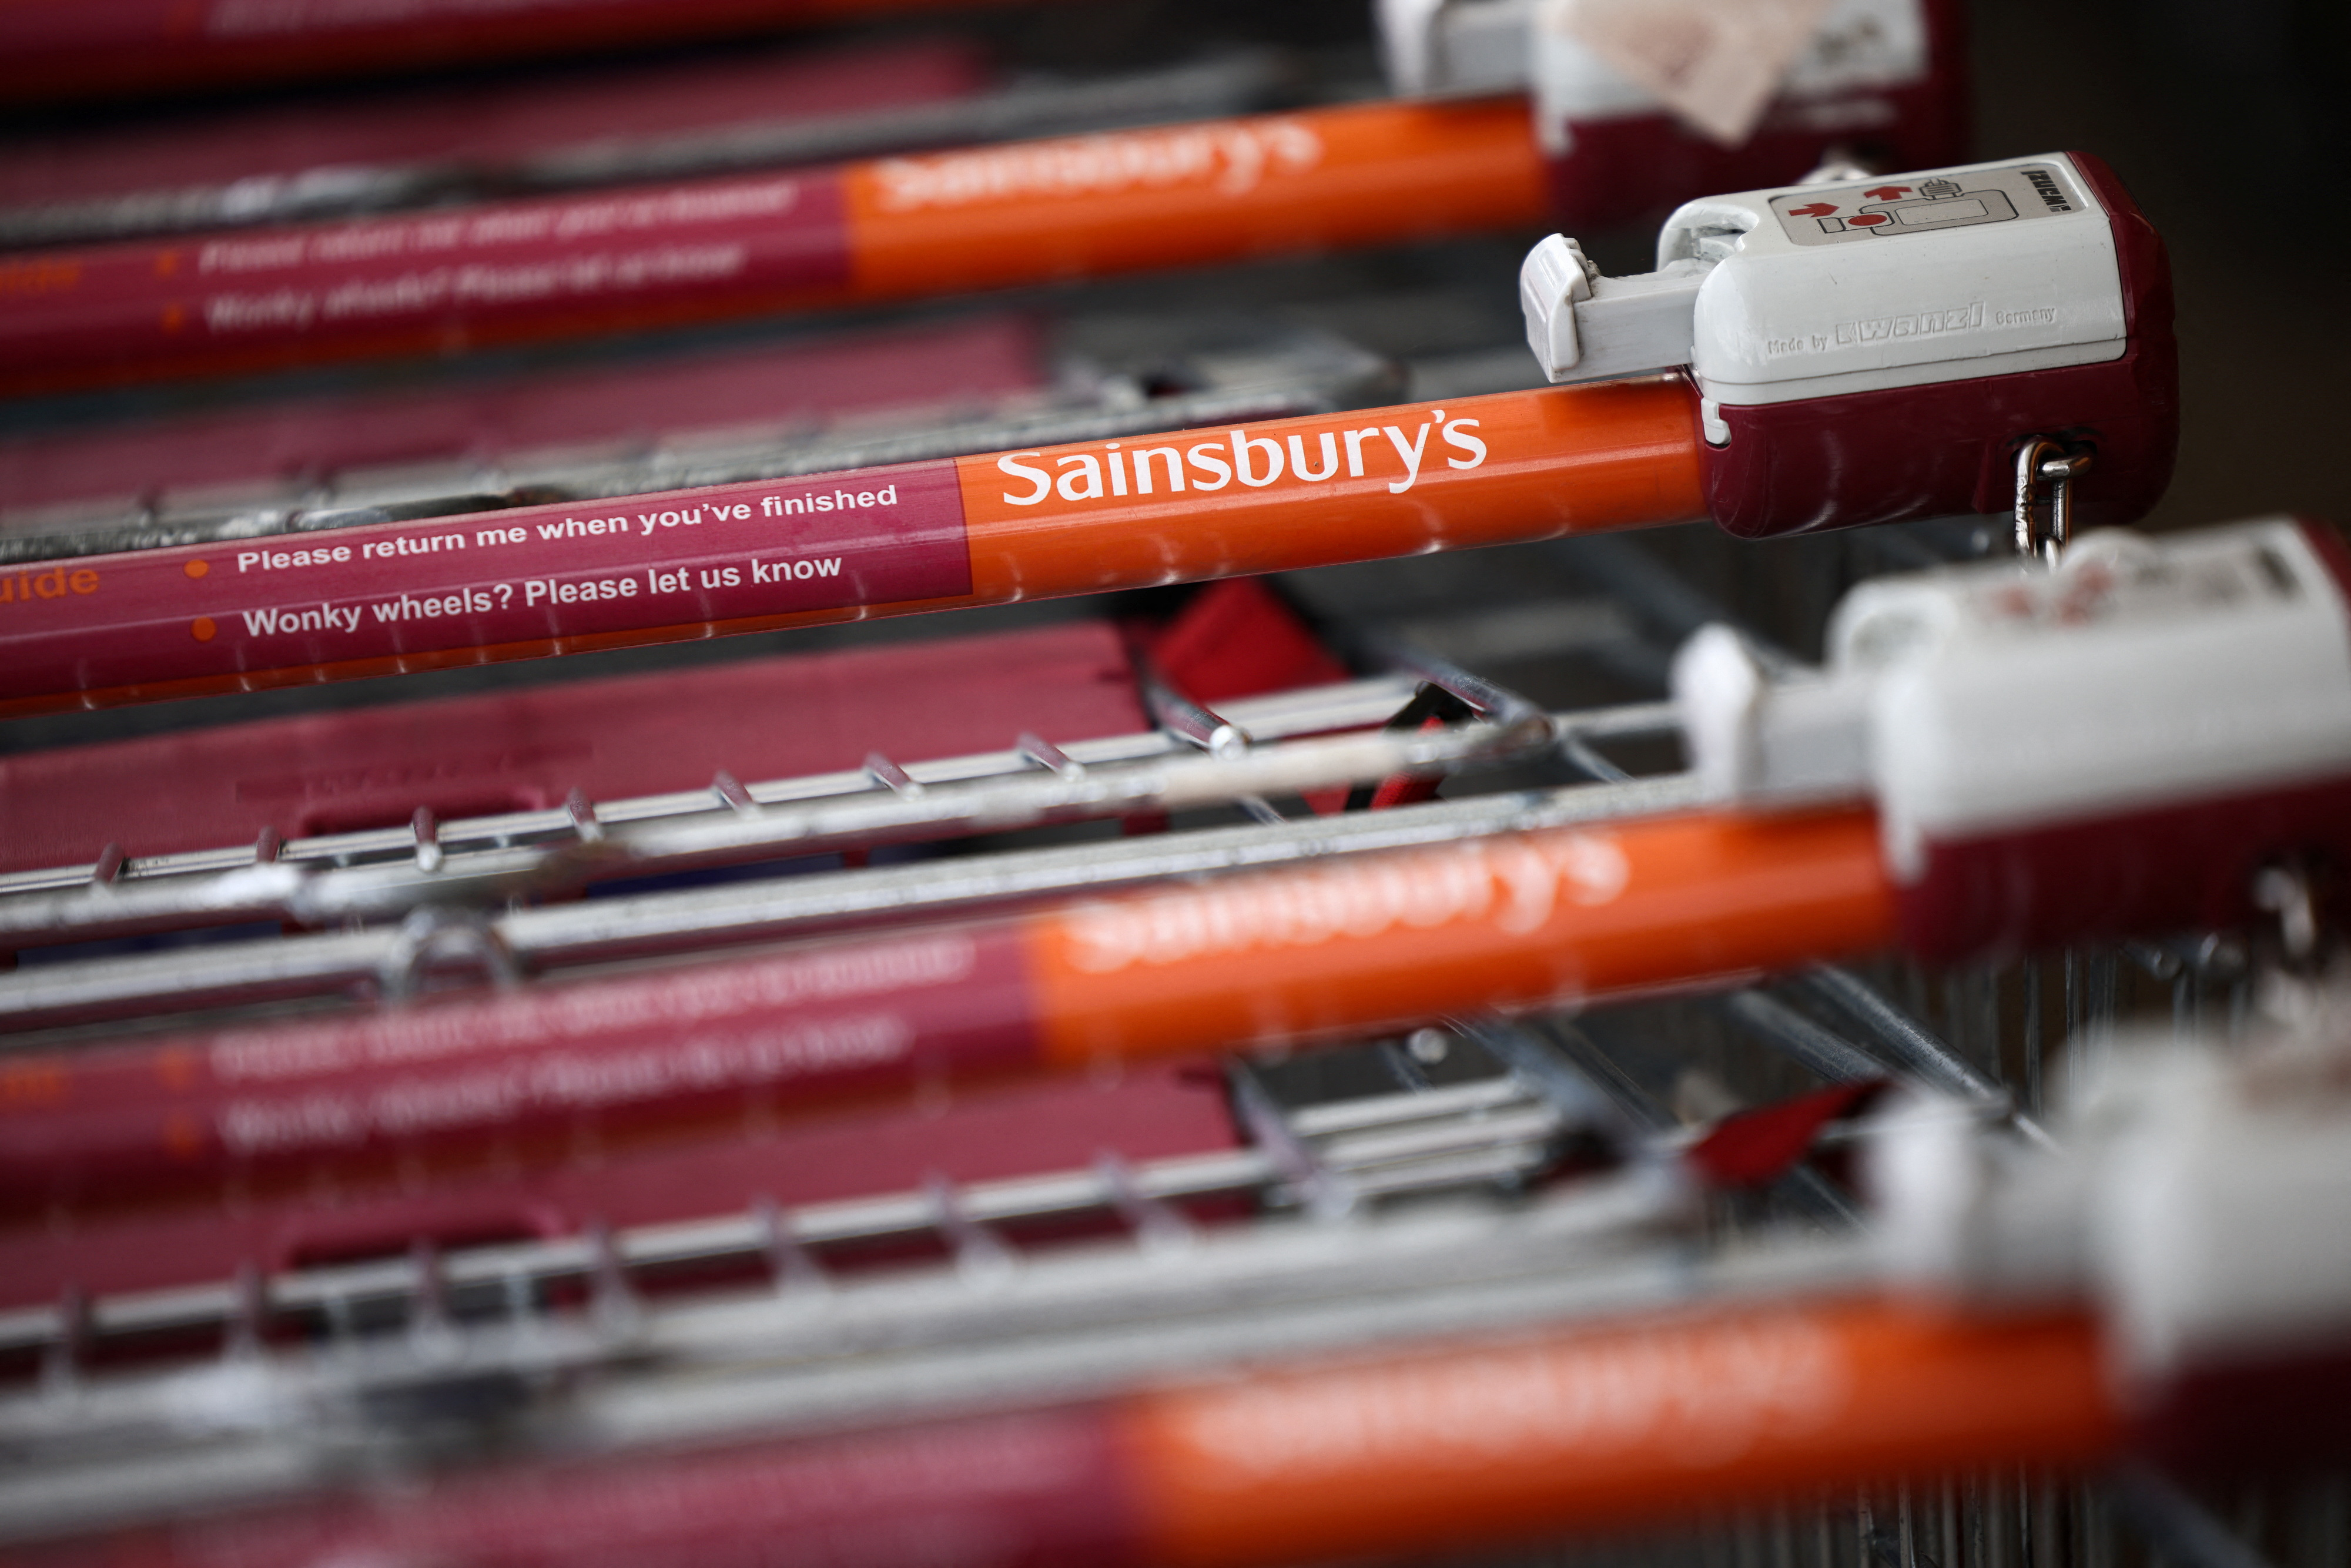 Trolleys stacked together inside a Sainsbury’s supermarket in Richmond, west London